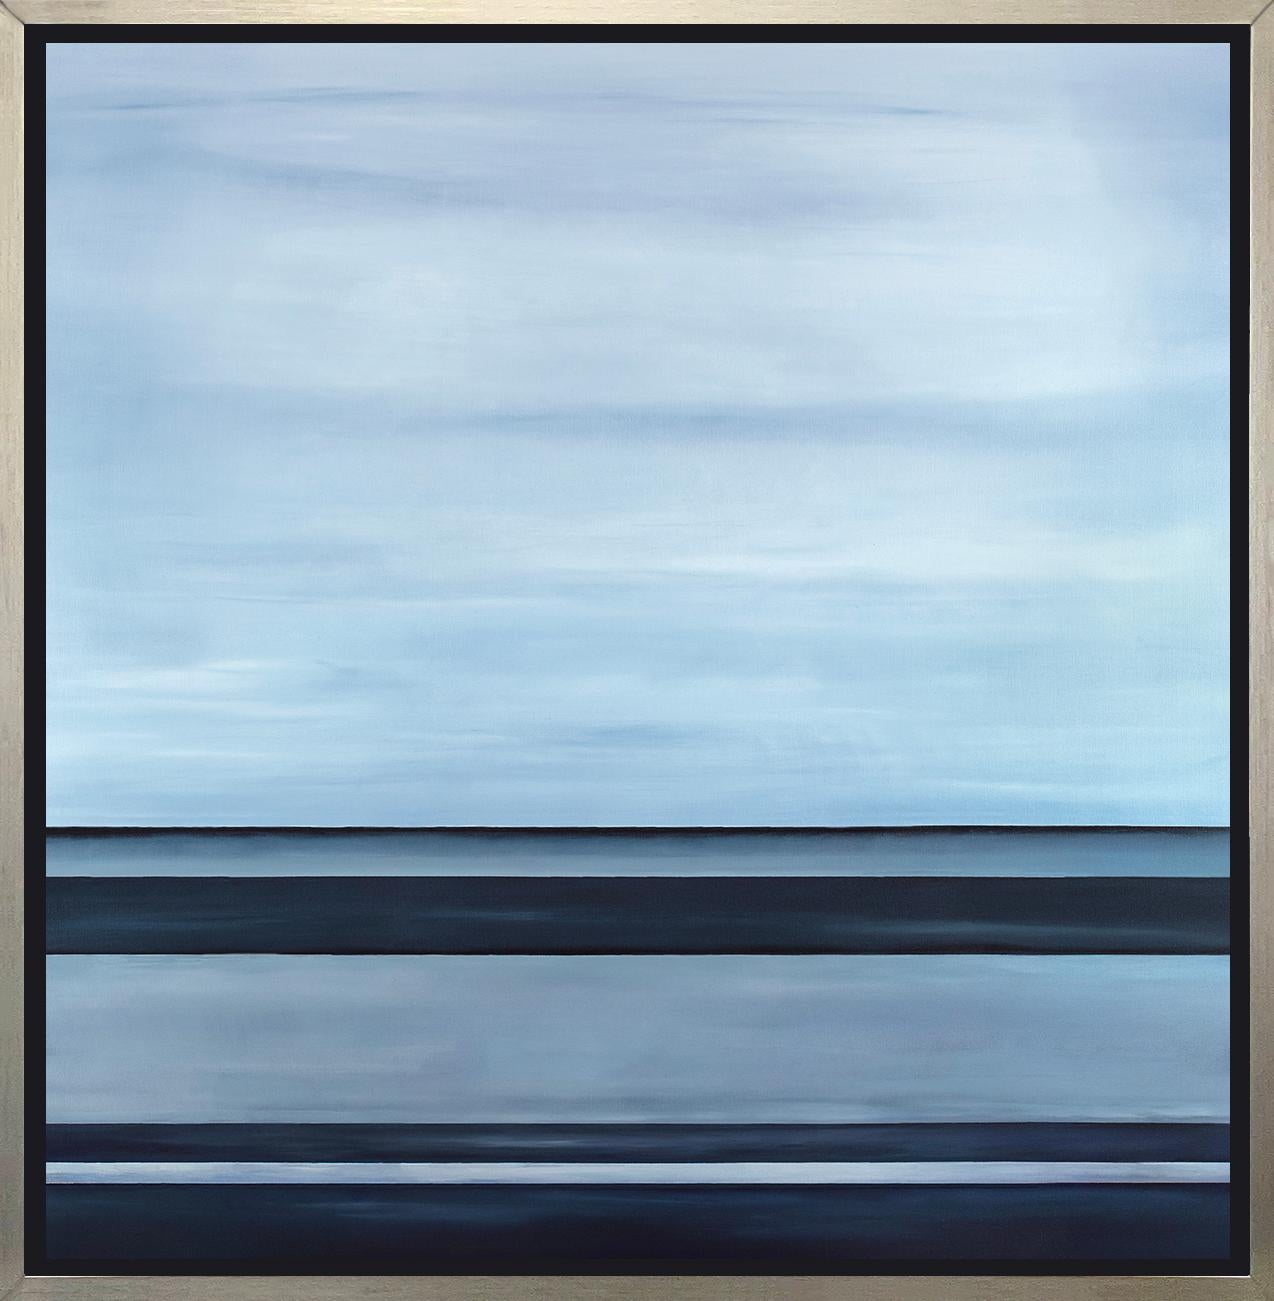 Tony Iadicicco Abstract Print - "Lost at Sea, " Framed Limited Edition Giclee Print, 30" x 30"